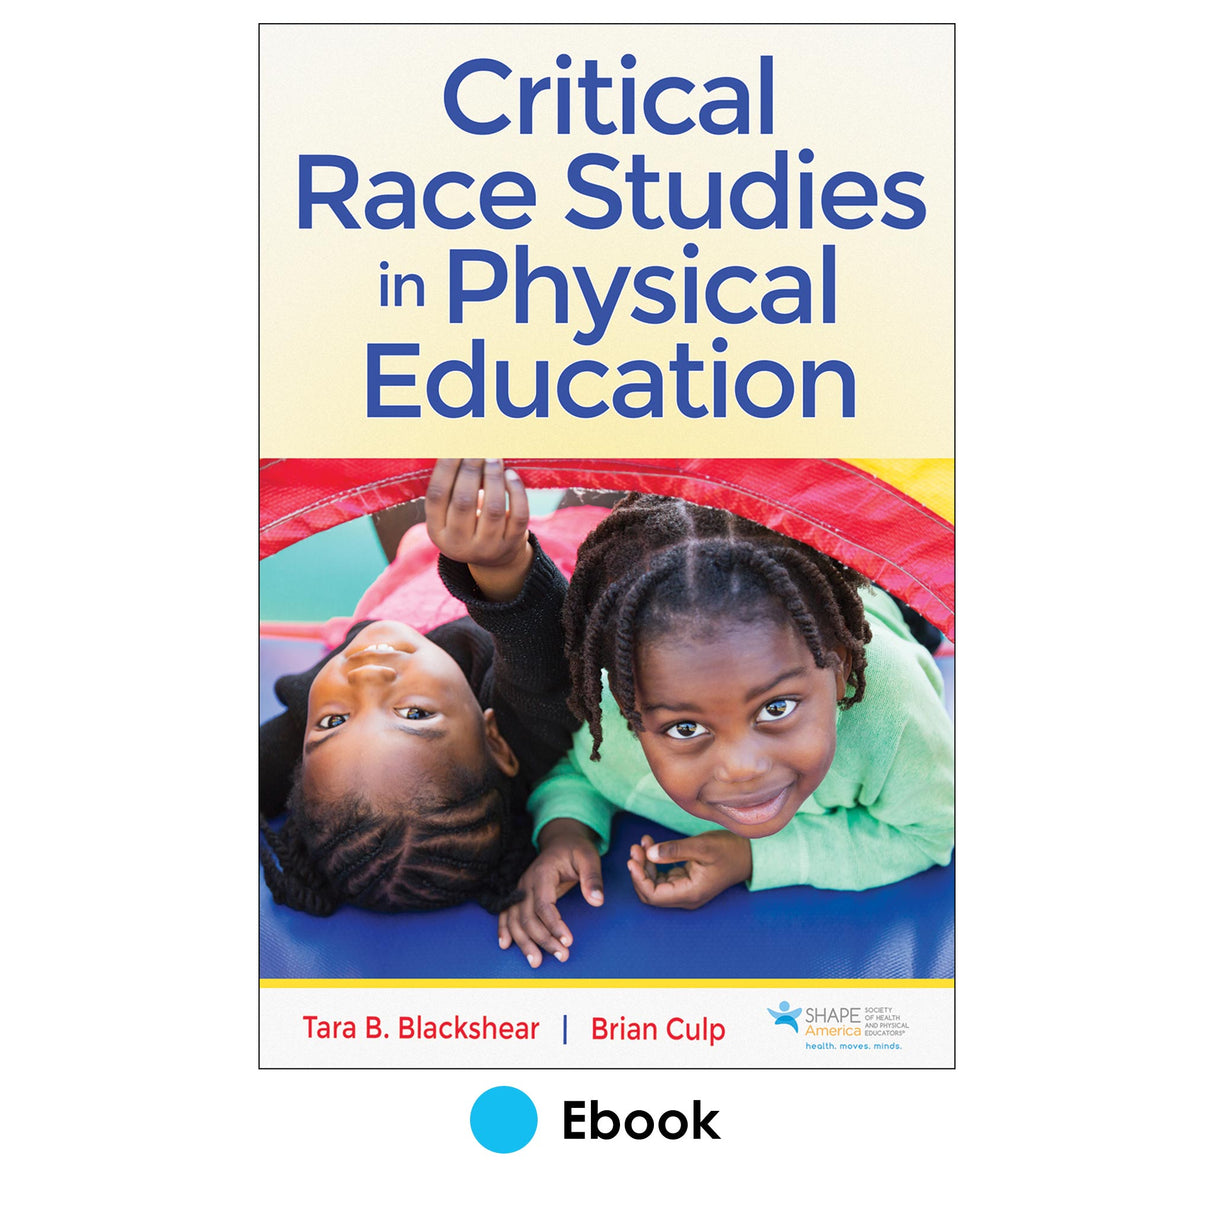 Critical Race Studies in Physical Education epub